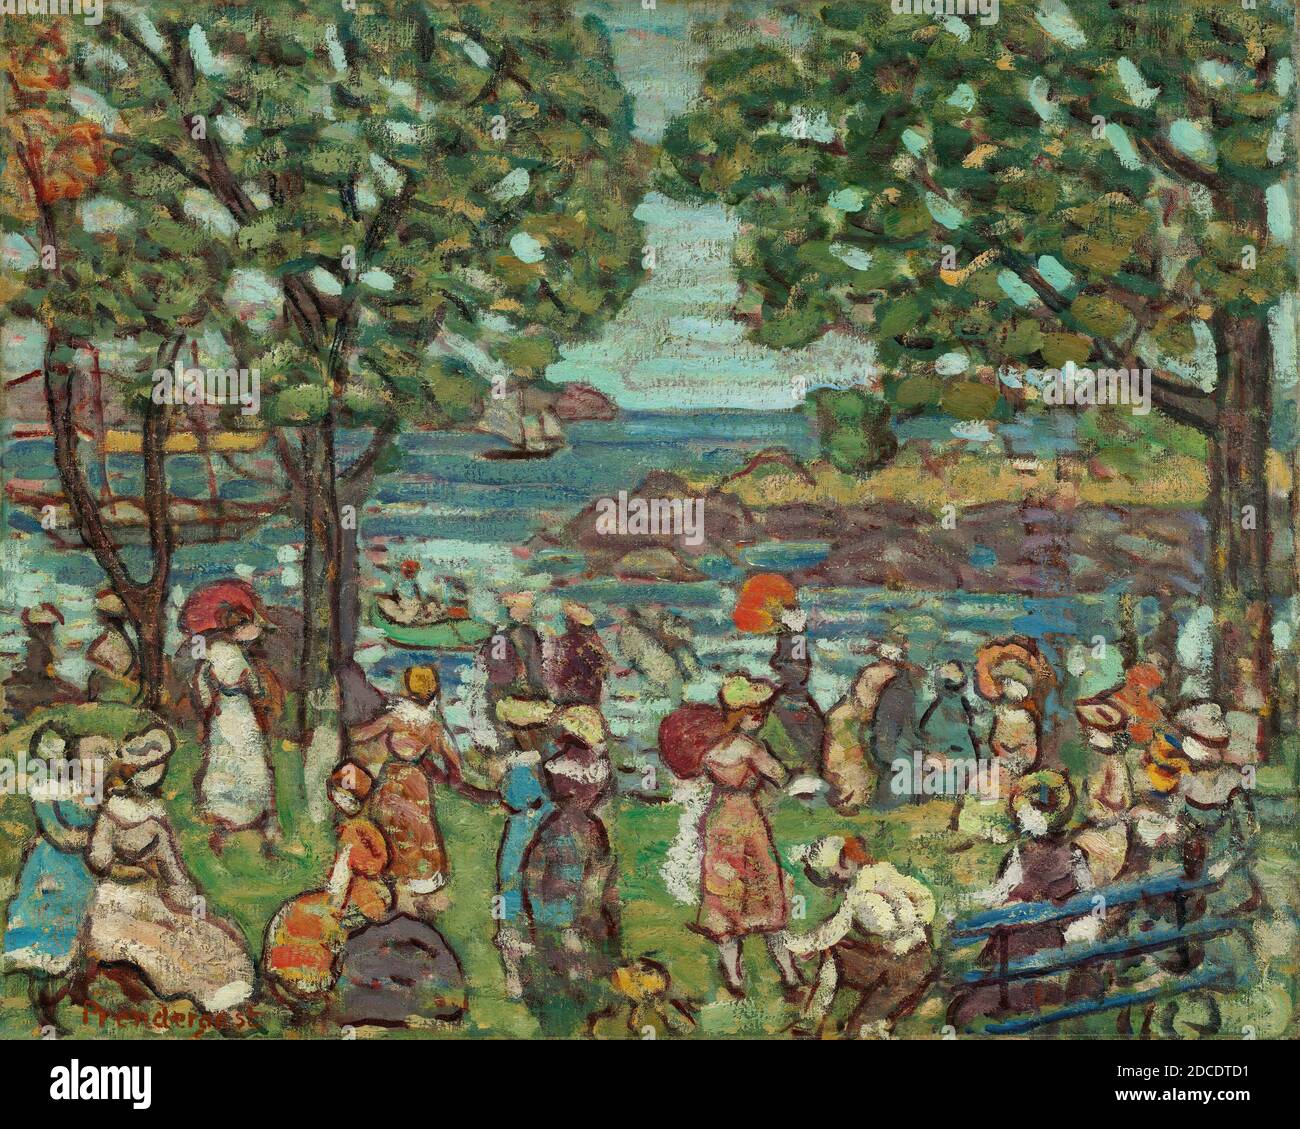 Maurice Prendergast, (painter), American, 1858 - 1924, Salem Cove, c. 1915/1918, oil on canvas, overall: 61.4 x 76.5 cm (24 3/16 x 30 1/8 in.), framed: 85.1 x 99.7 x 6.7 cm (33 1/2 x 39 1/4 x 2 5/8 in Stock Photo